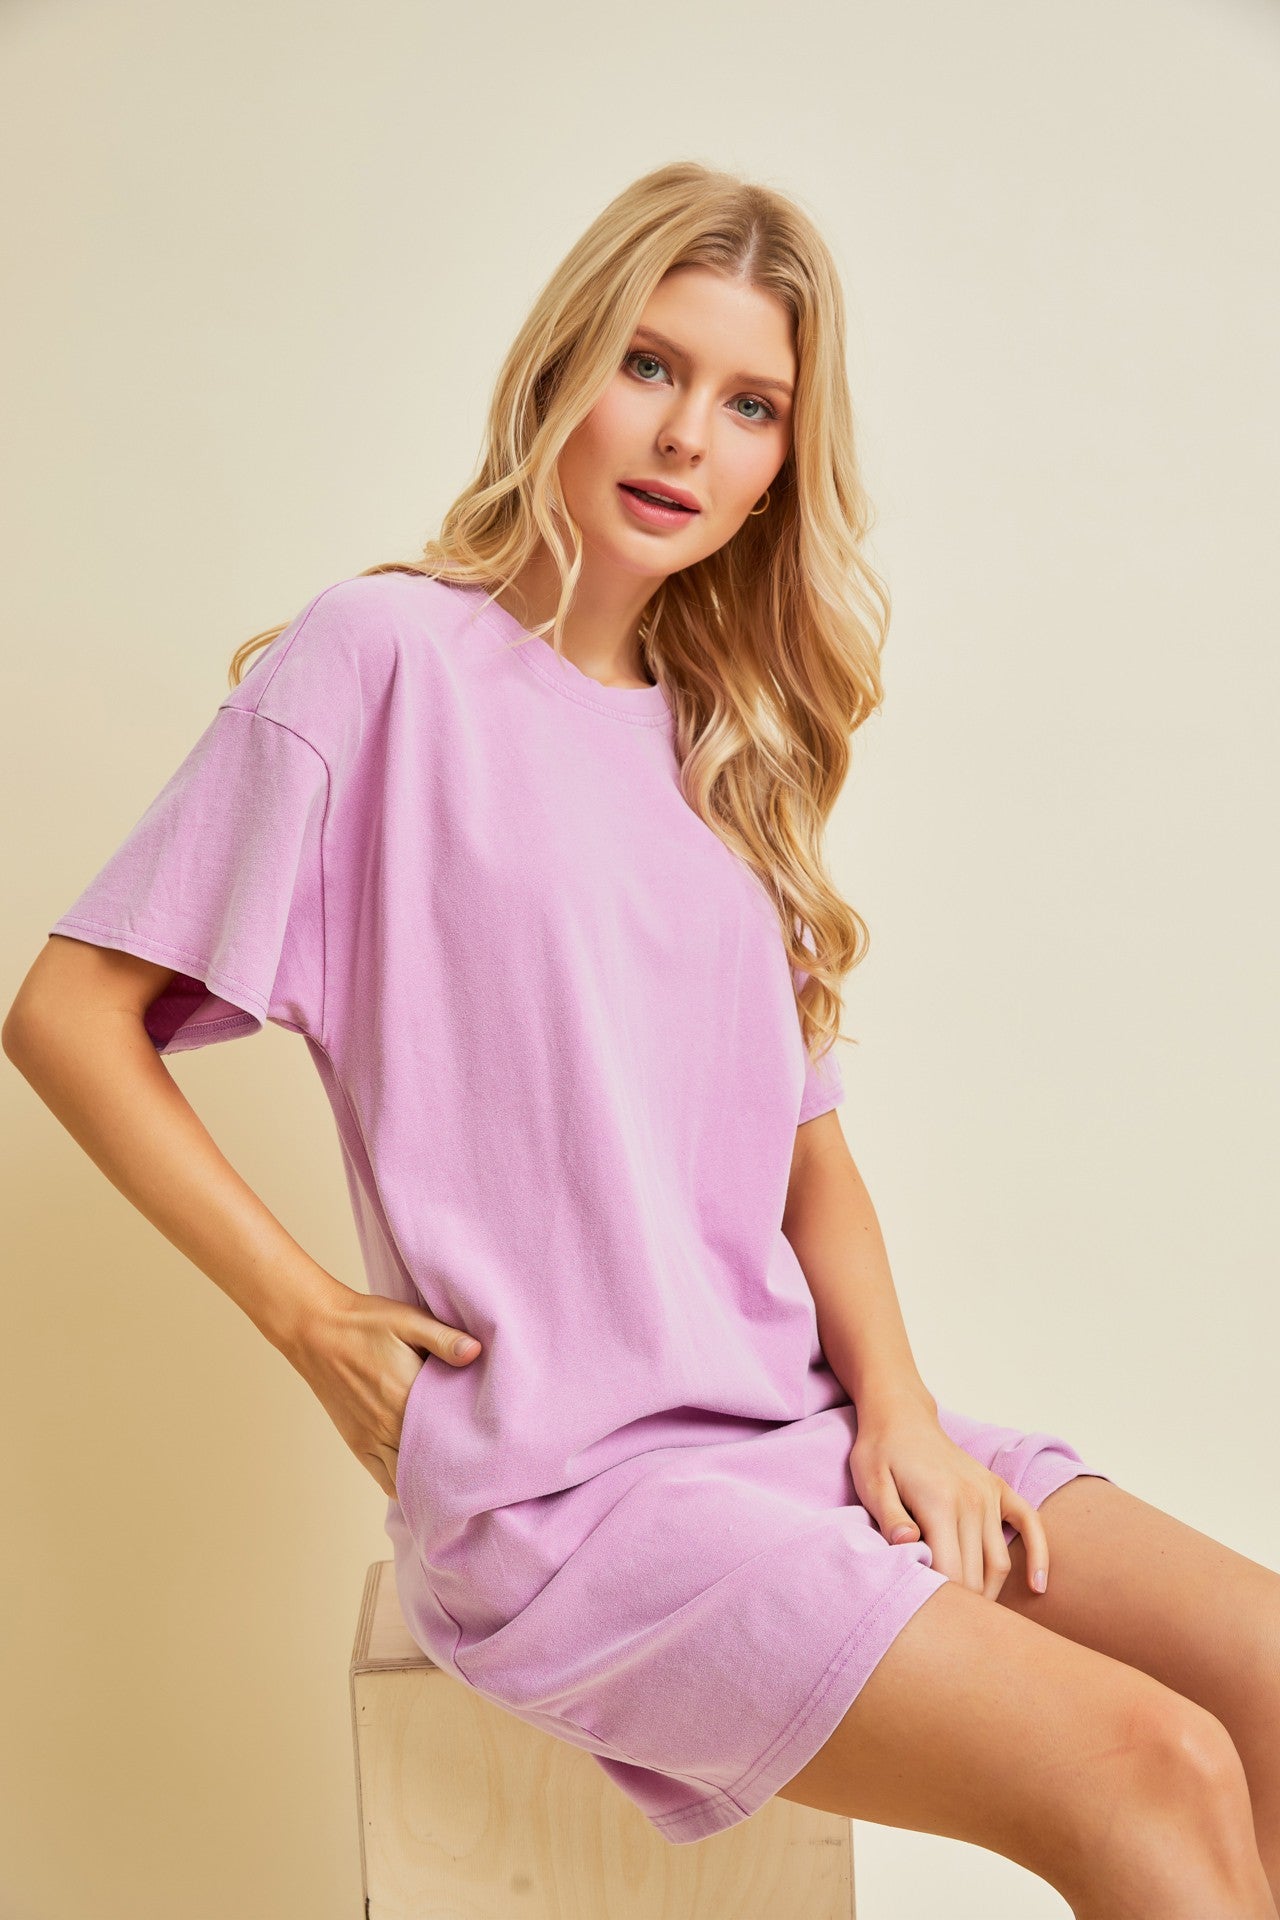 True Perfection Classic Tshirt Dress - Be You Boutique